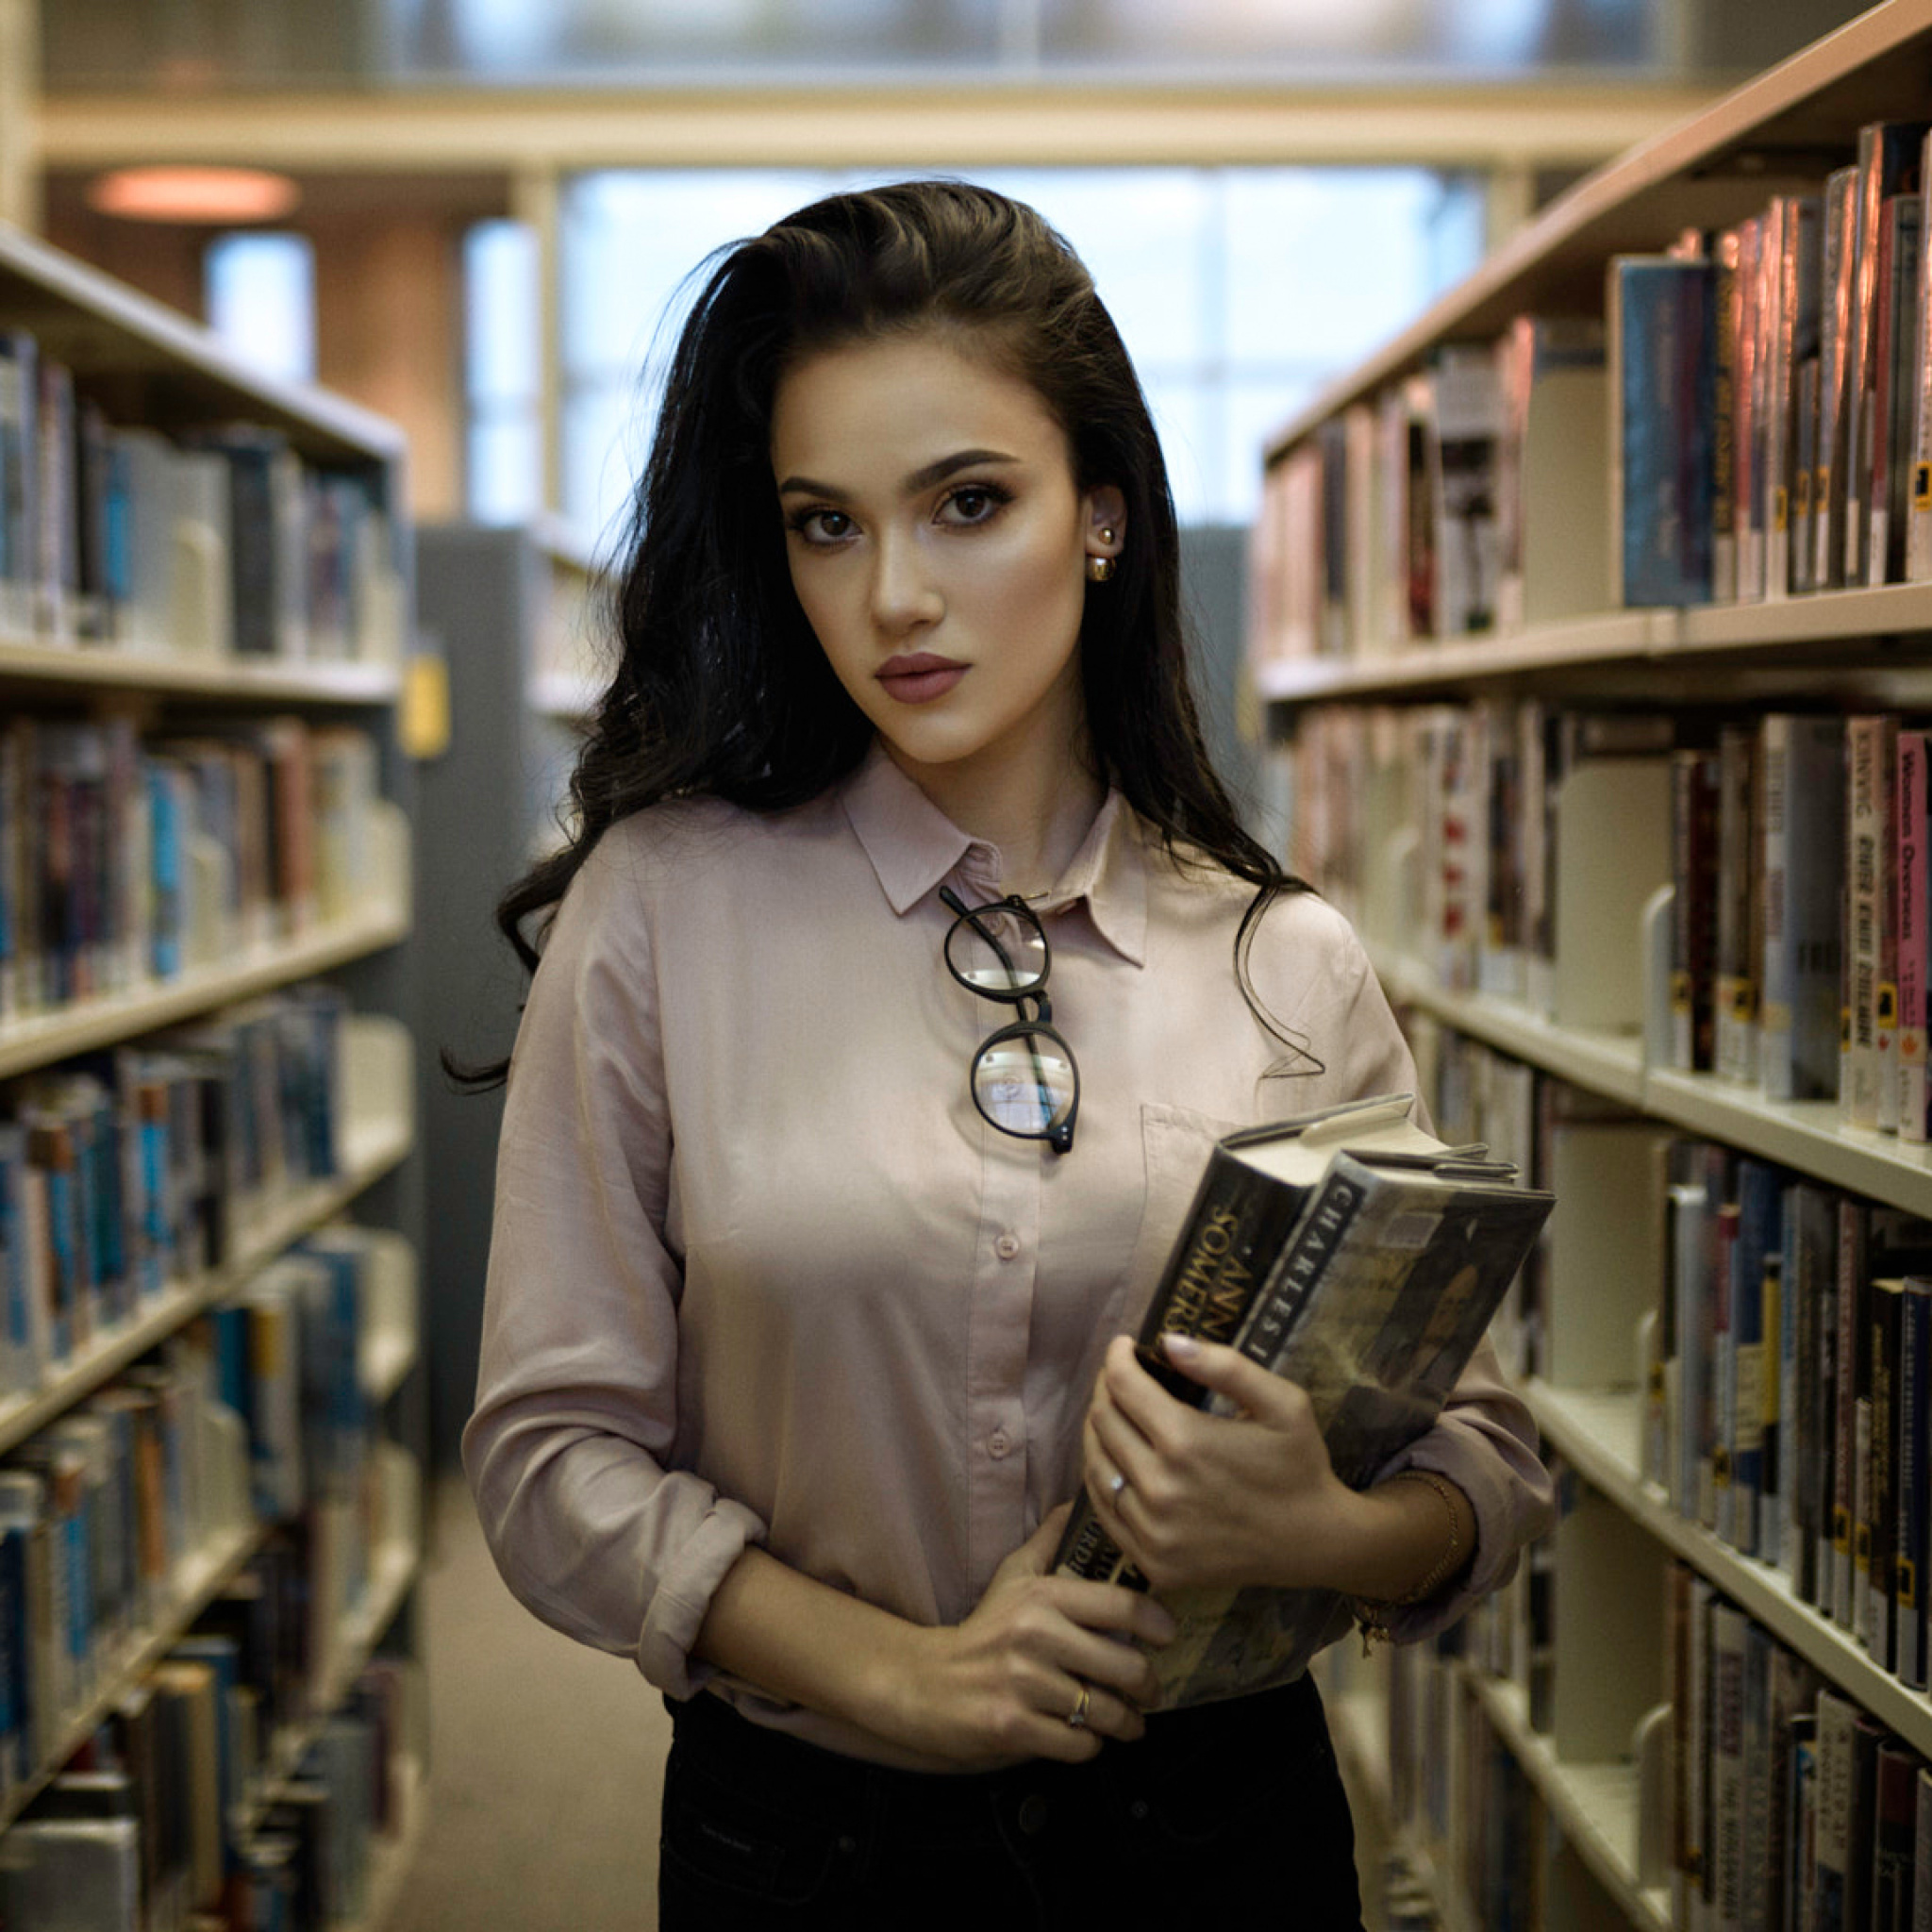 Girl with books in library screenshot #1 2048x2048